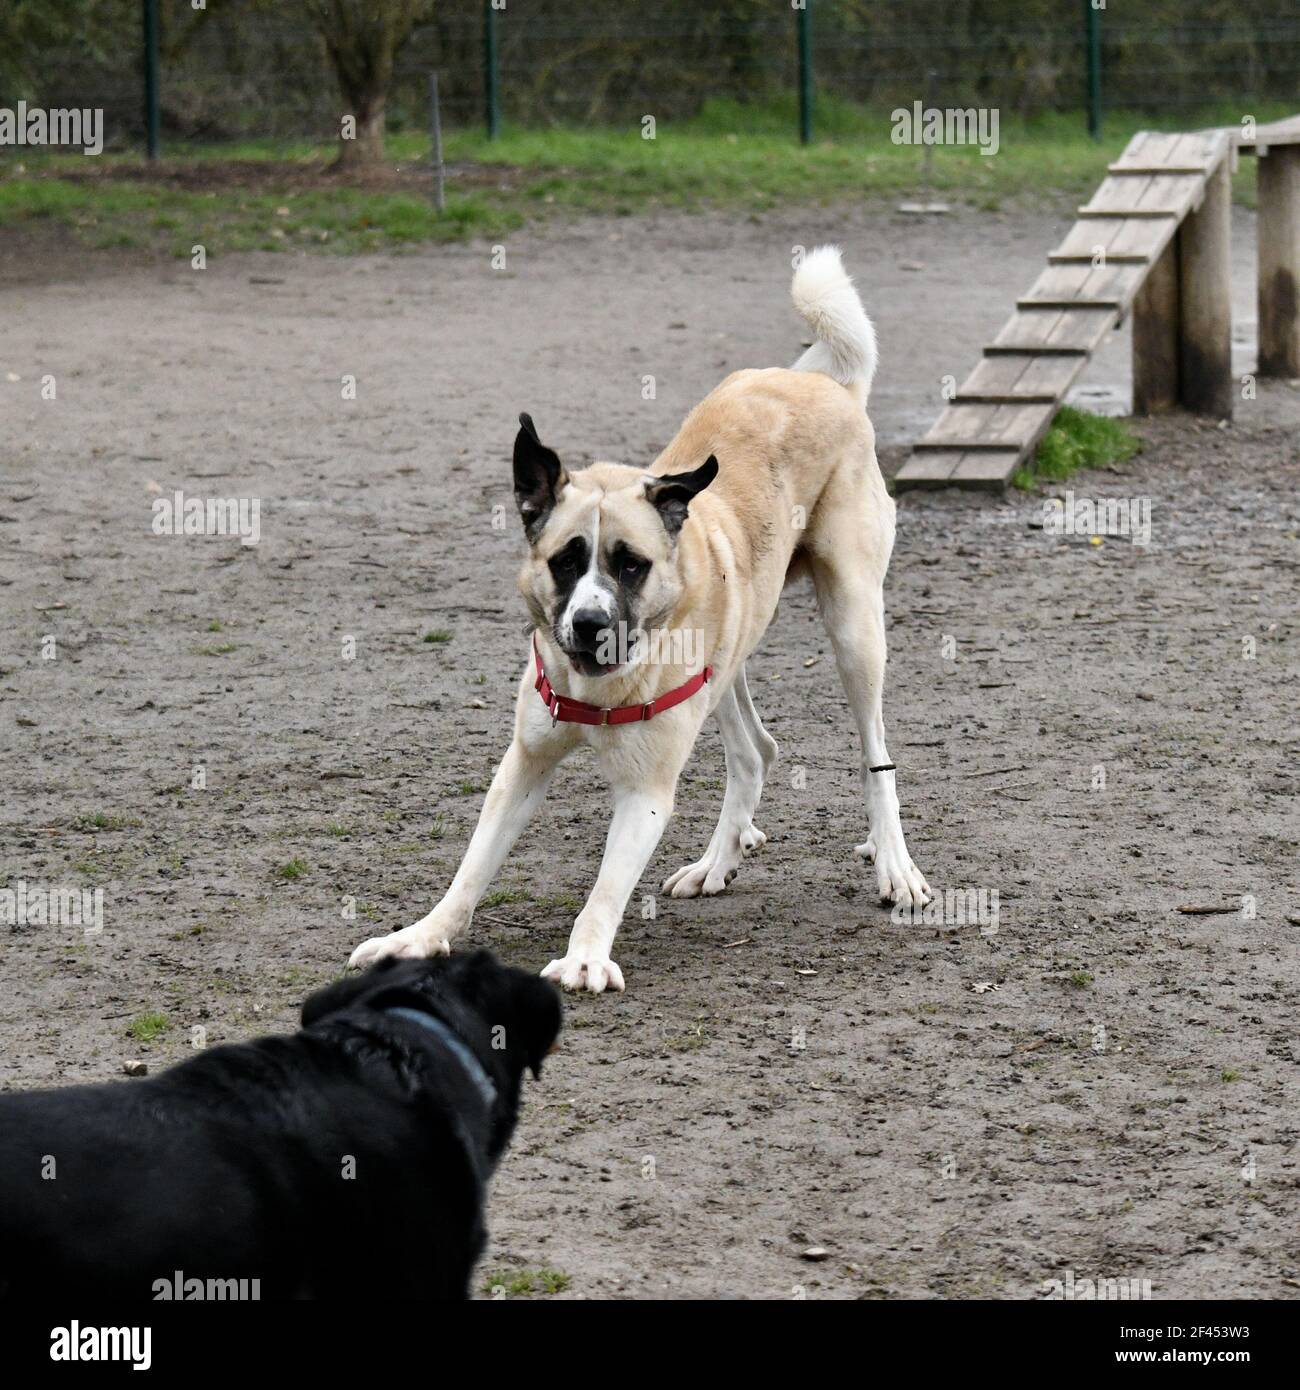 An Anatolian Shepherd fighting with a black Majorca Shepherd at the training in a dog park Stock Photo